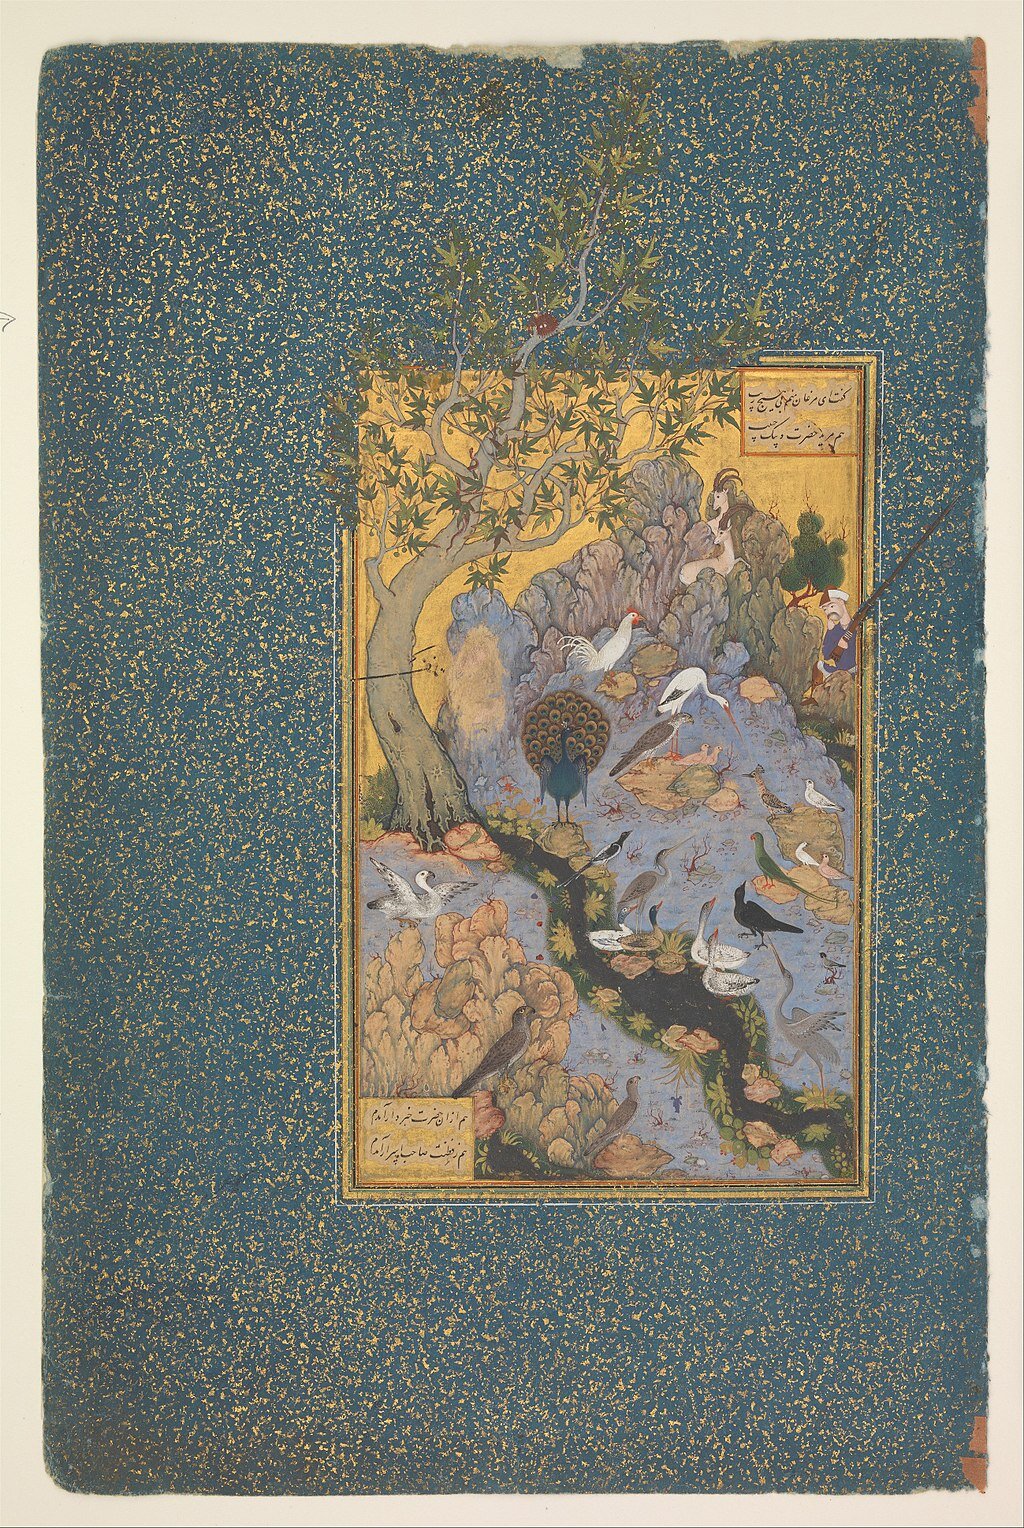 The Conference of The Birds - Farid Attar